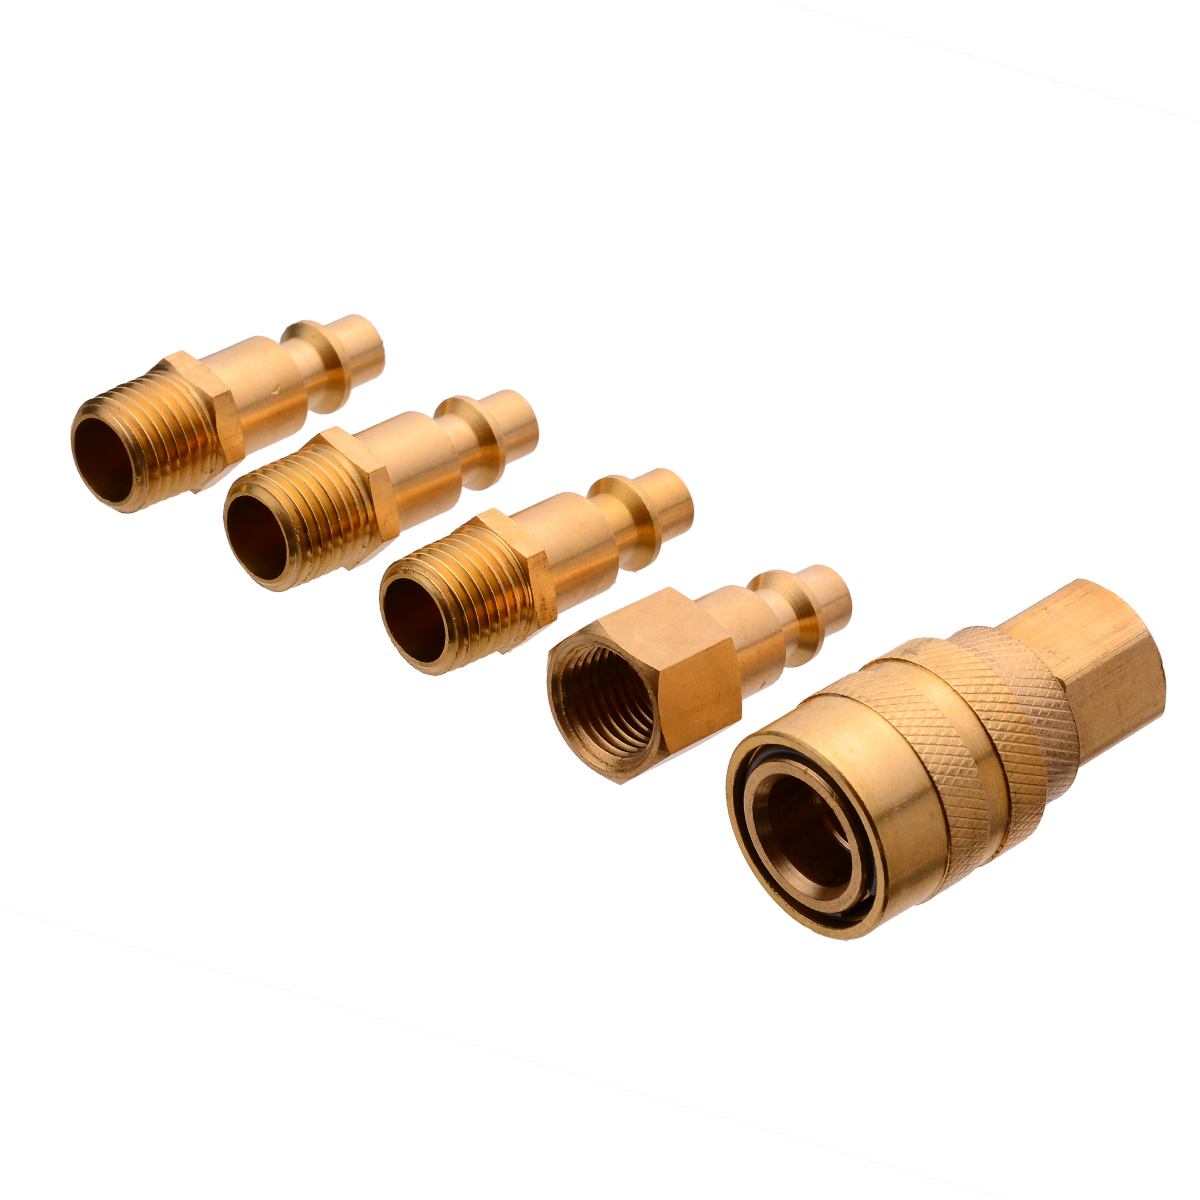 5pcs New Solid Brass Quick Coupler Set Air Hose Connector Fittings 1/4" NPT Plug Female Male Quick Plugs Pneumatic Tool Parts